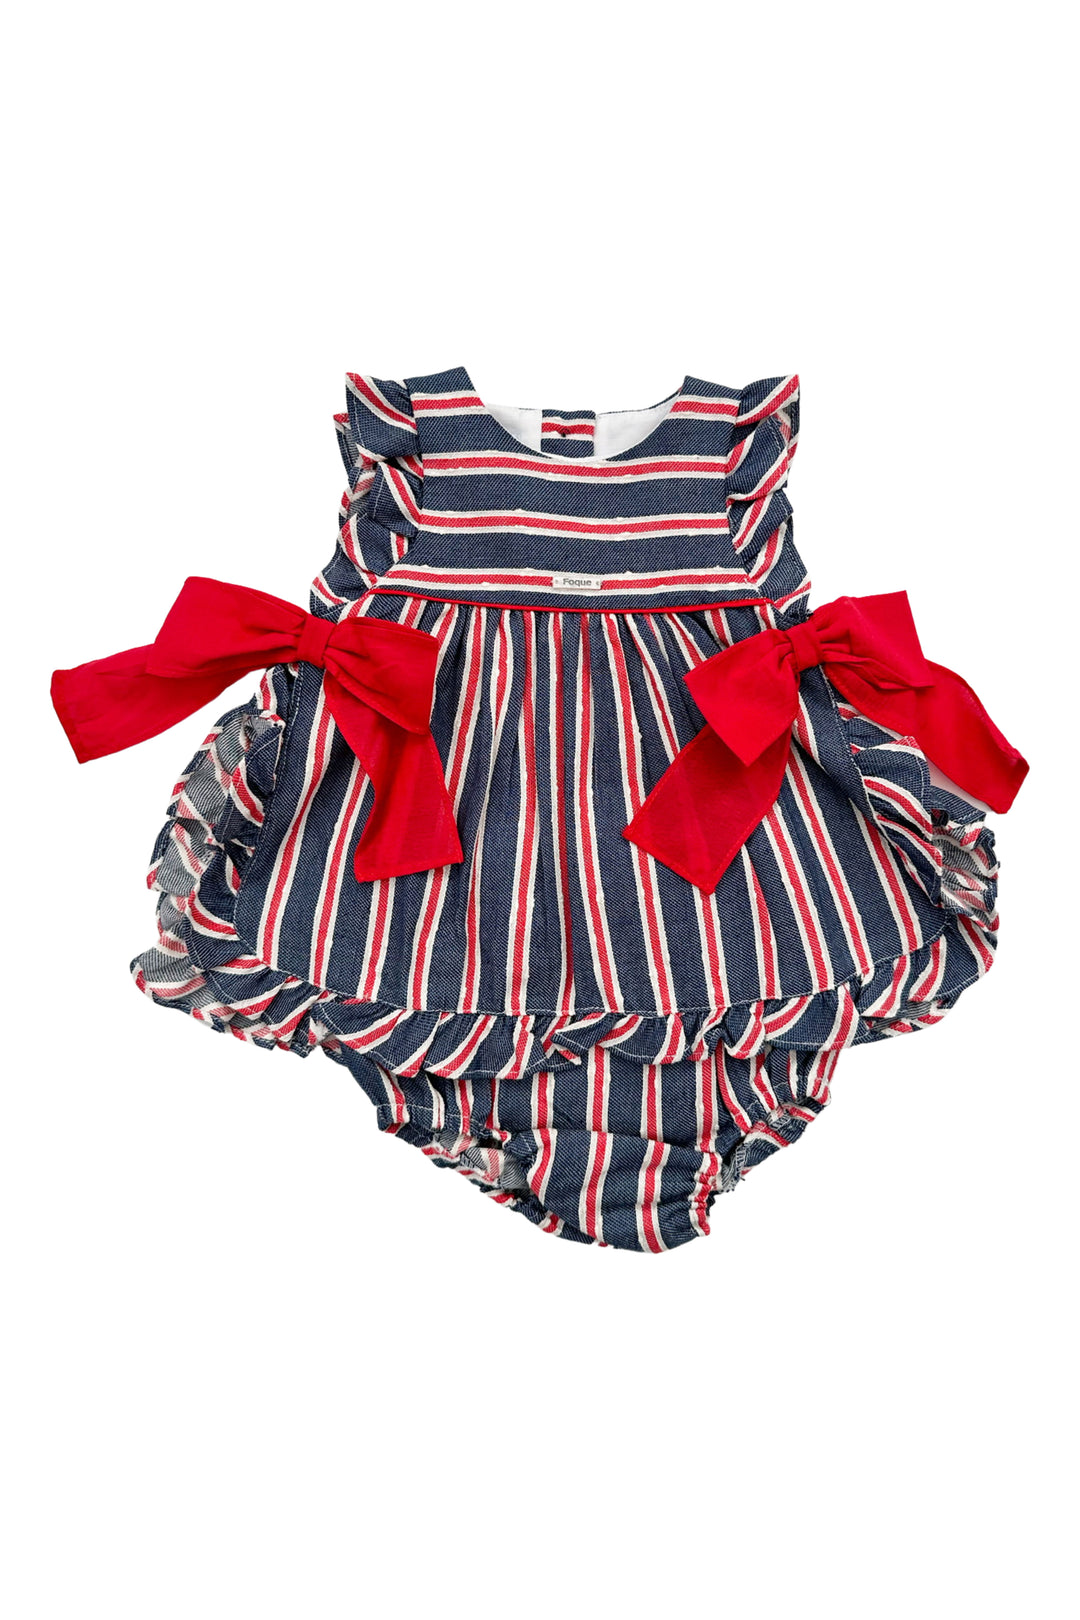 Foque PREORDER "Roma" Navy & Red Striped Dress & Bloomers | Millie and John